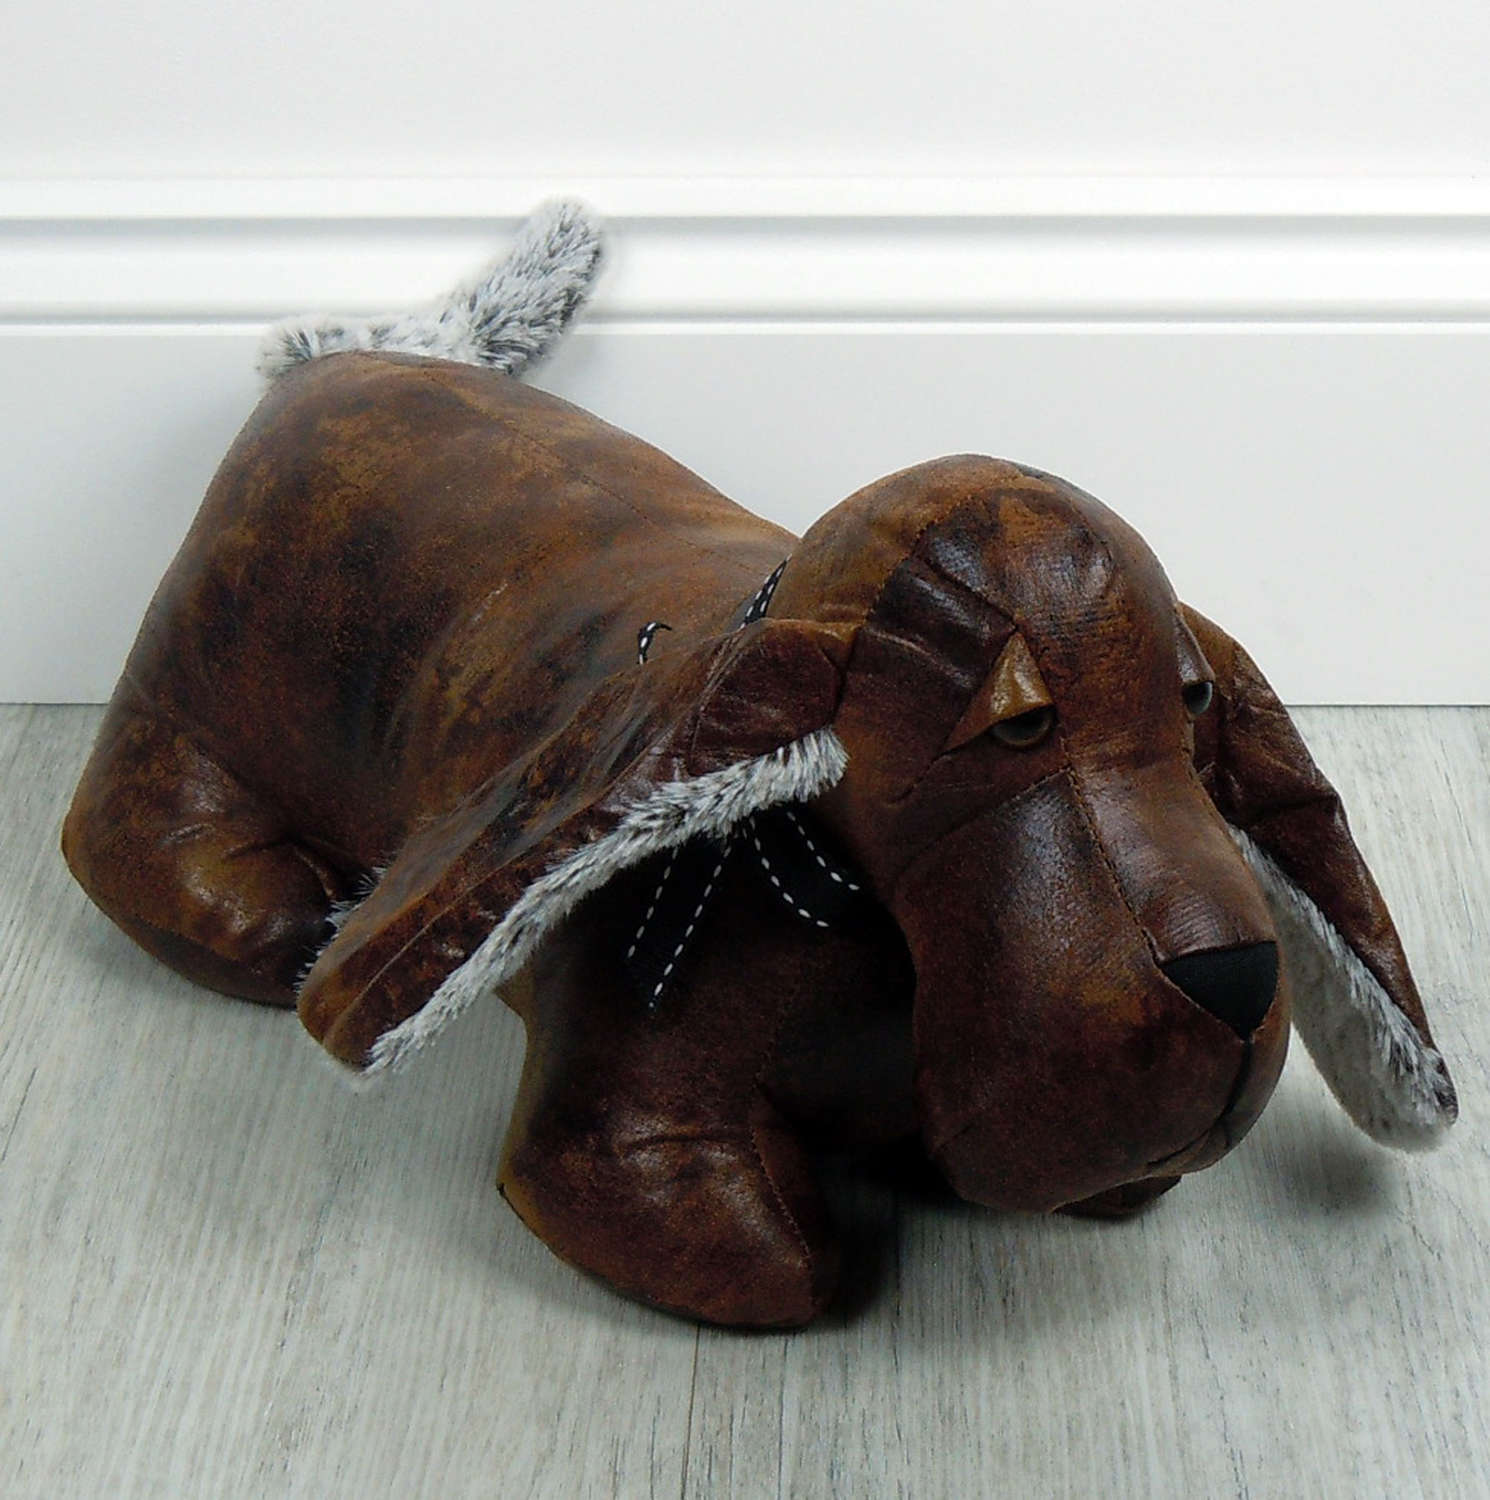 Antique Pal Dachshund door stop in faux leather